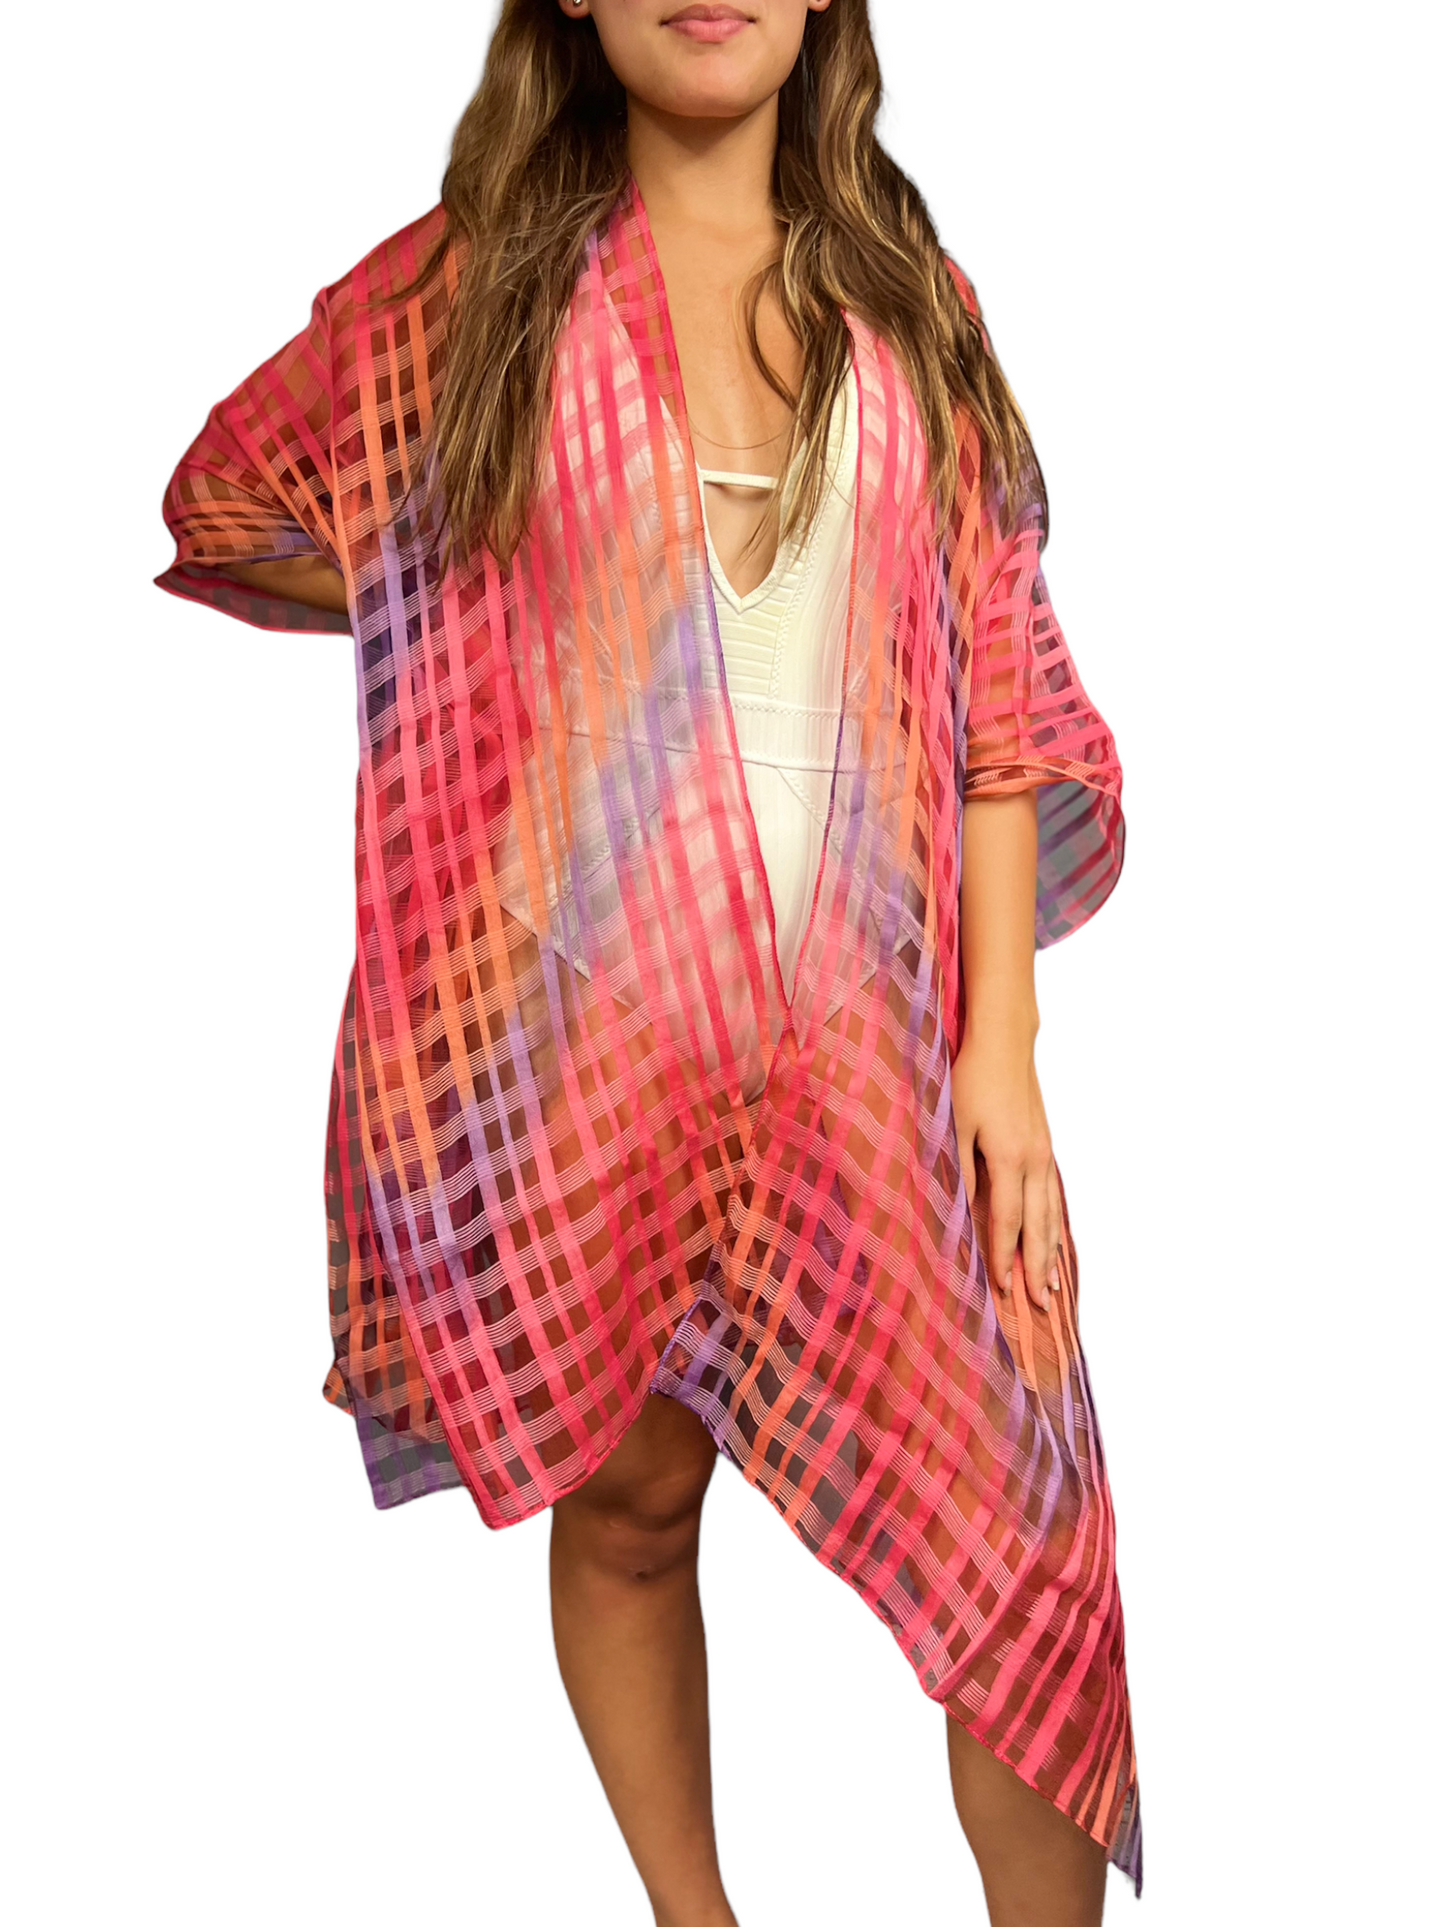 Holbox Women's Cover-Up | Silk- Made By Hand